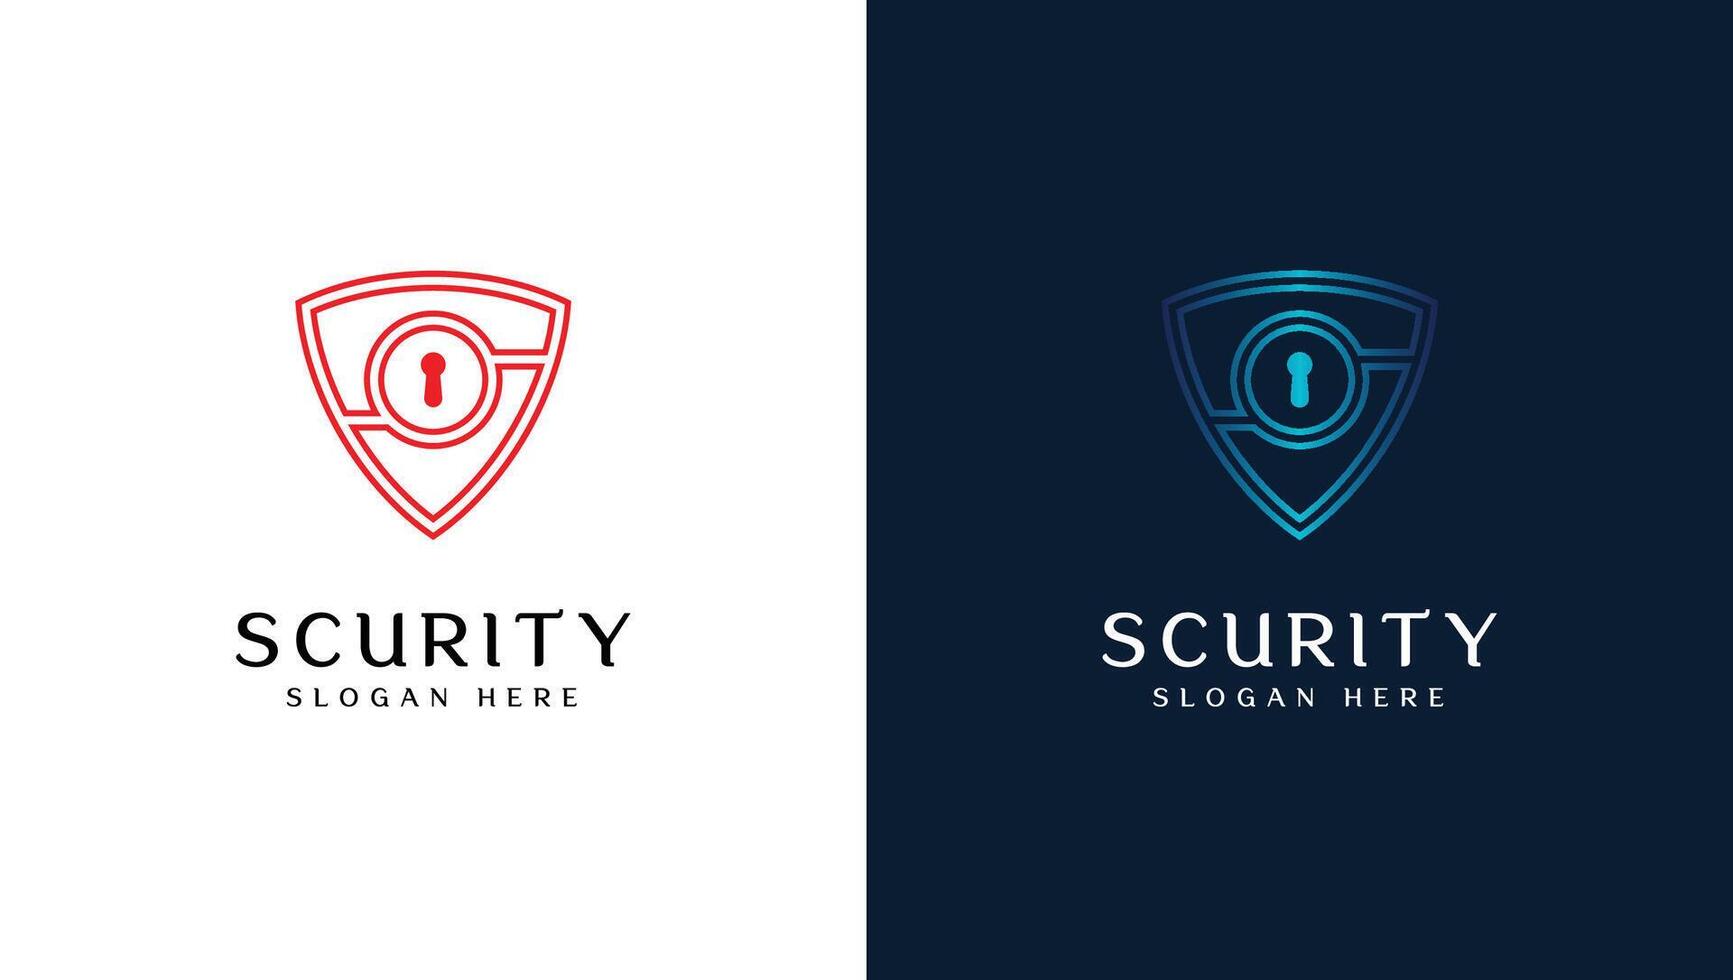 Security logo with a shield frame vector